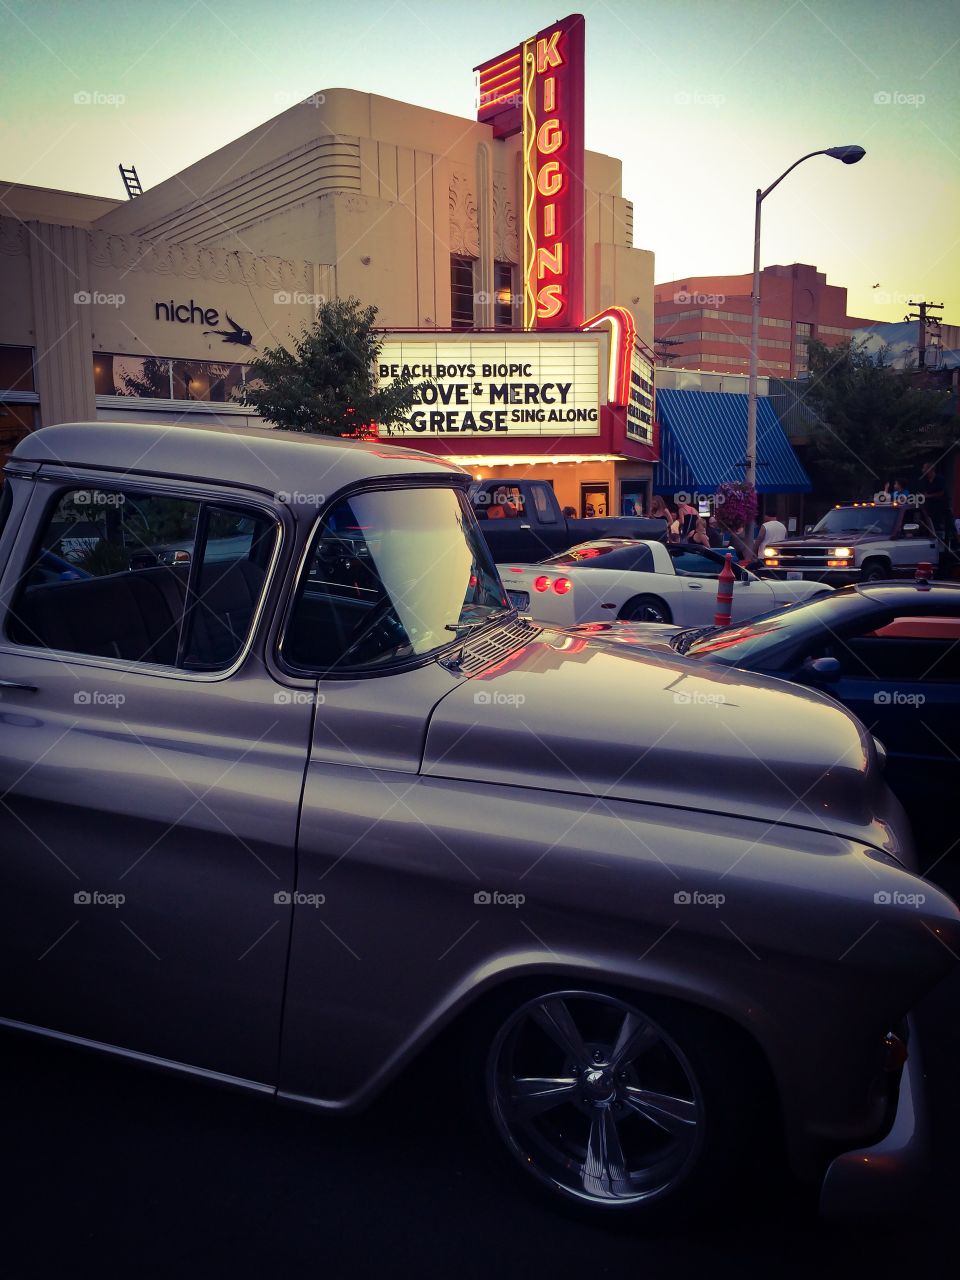 Classic pickup in downtown. Vintage pickup parked in front of vintage movie theater